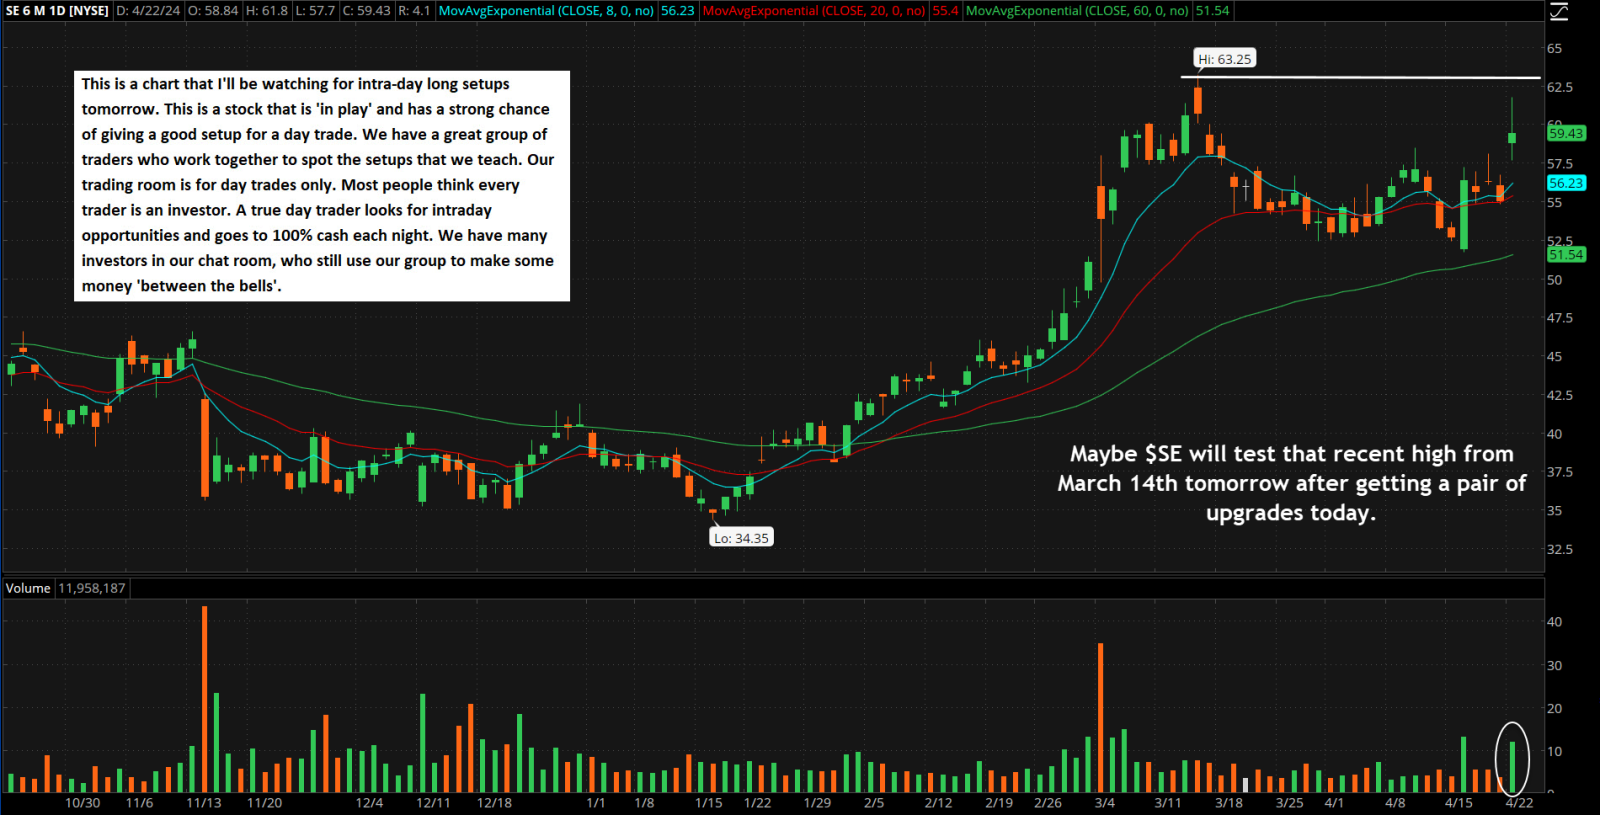 Maybe $Sea (SE.US)$  will test that recent high from March 14th tomorrow after getting a pair of upgrades today.